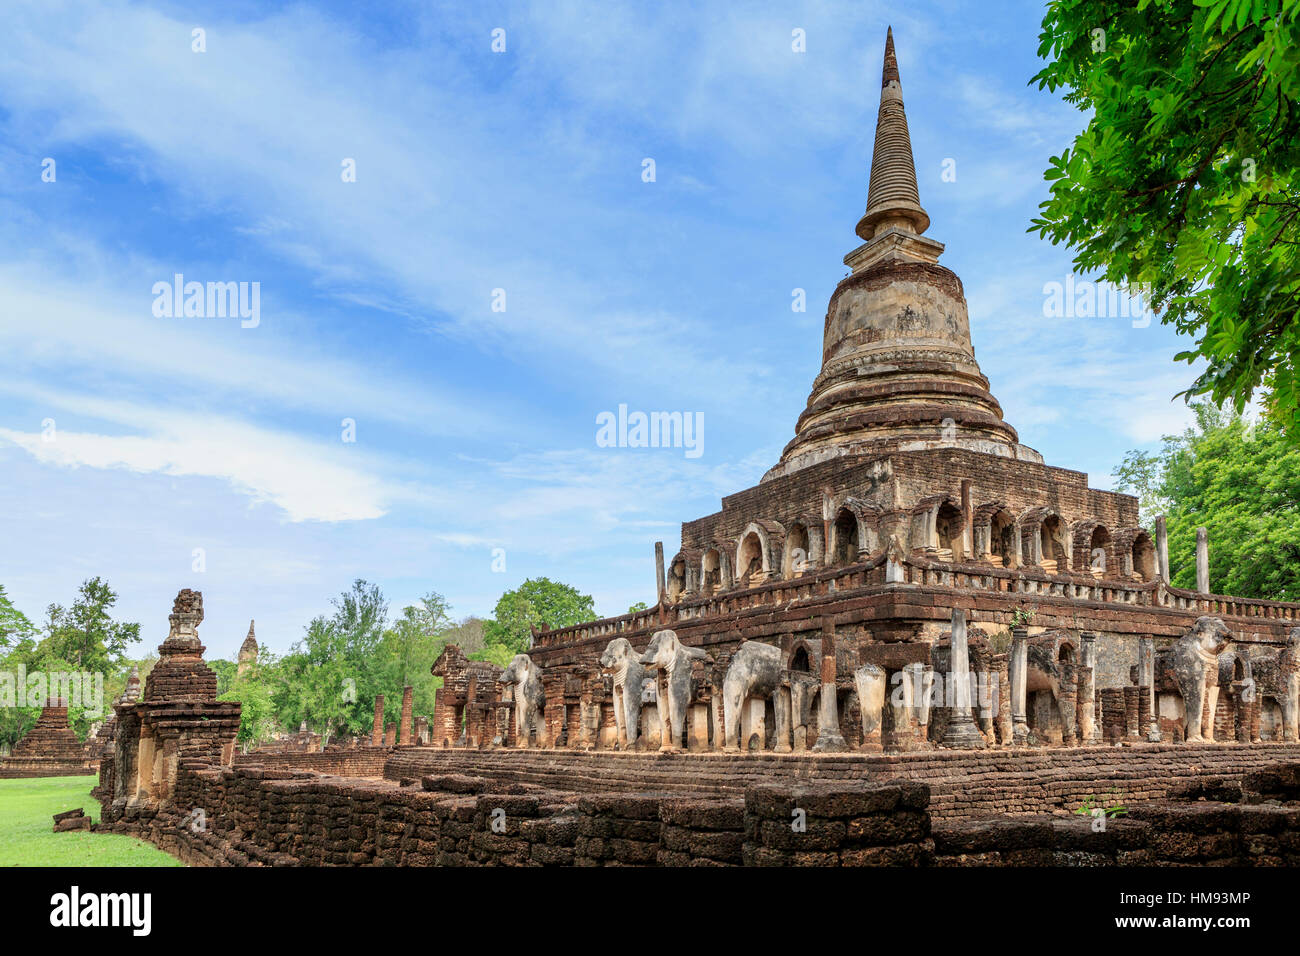 Temple in Si Satchanalai decorated with elephant sculptures, Sukhothai, Thailand, Southeast Asia Stock Photo